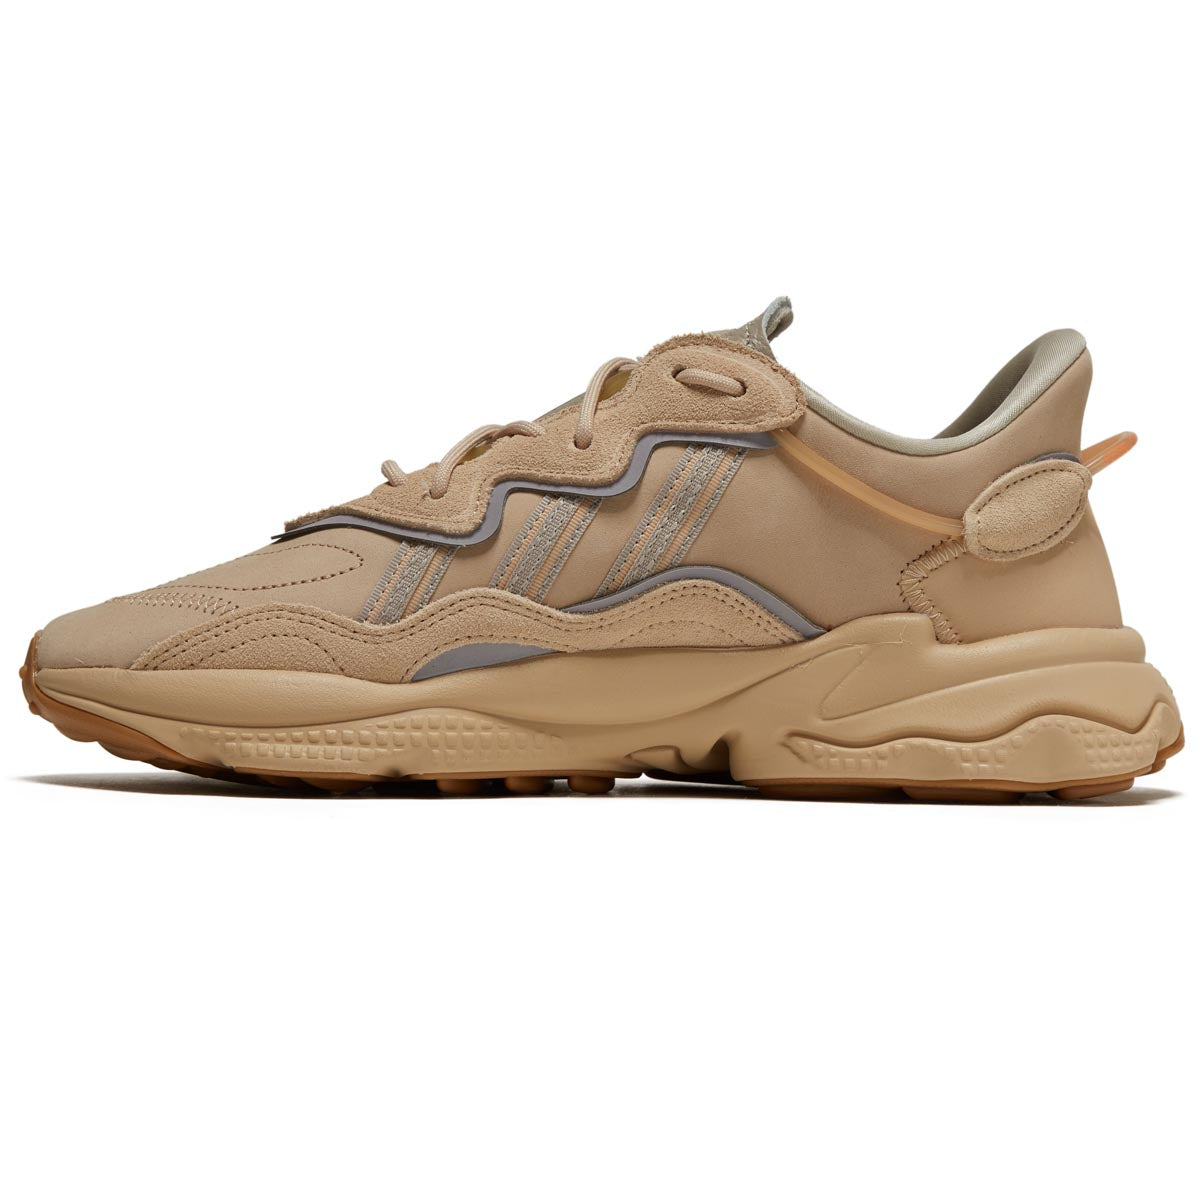 Adidas Ozweego Shoes - St Pale Nude/Light Brown/Solar Red image 2